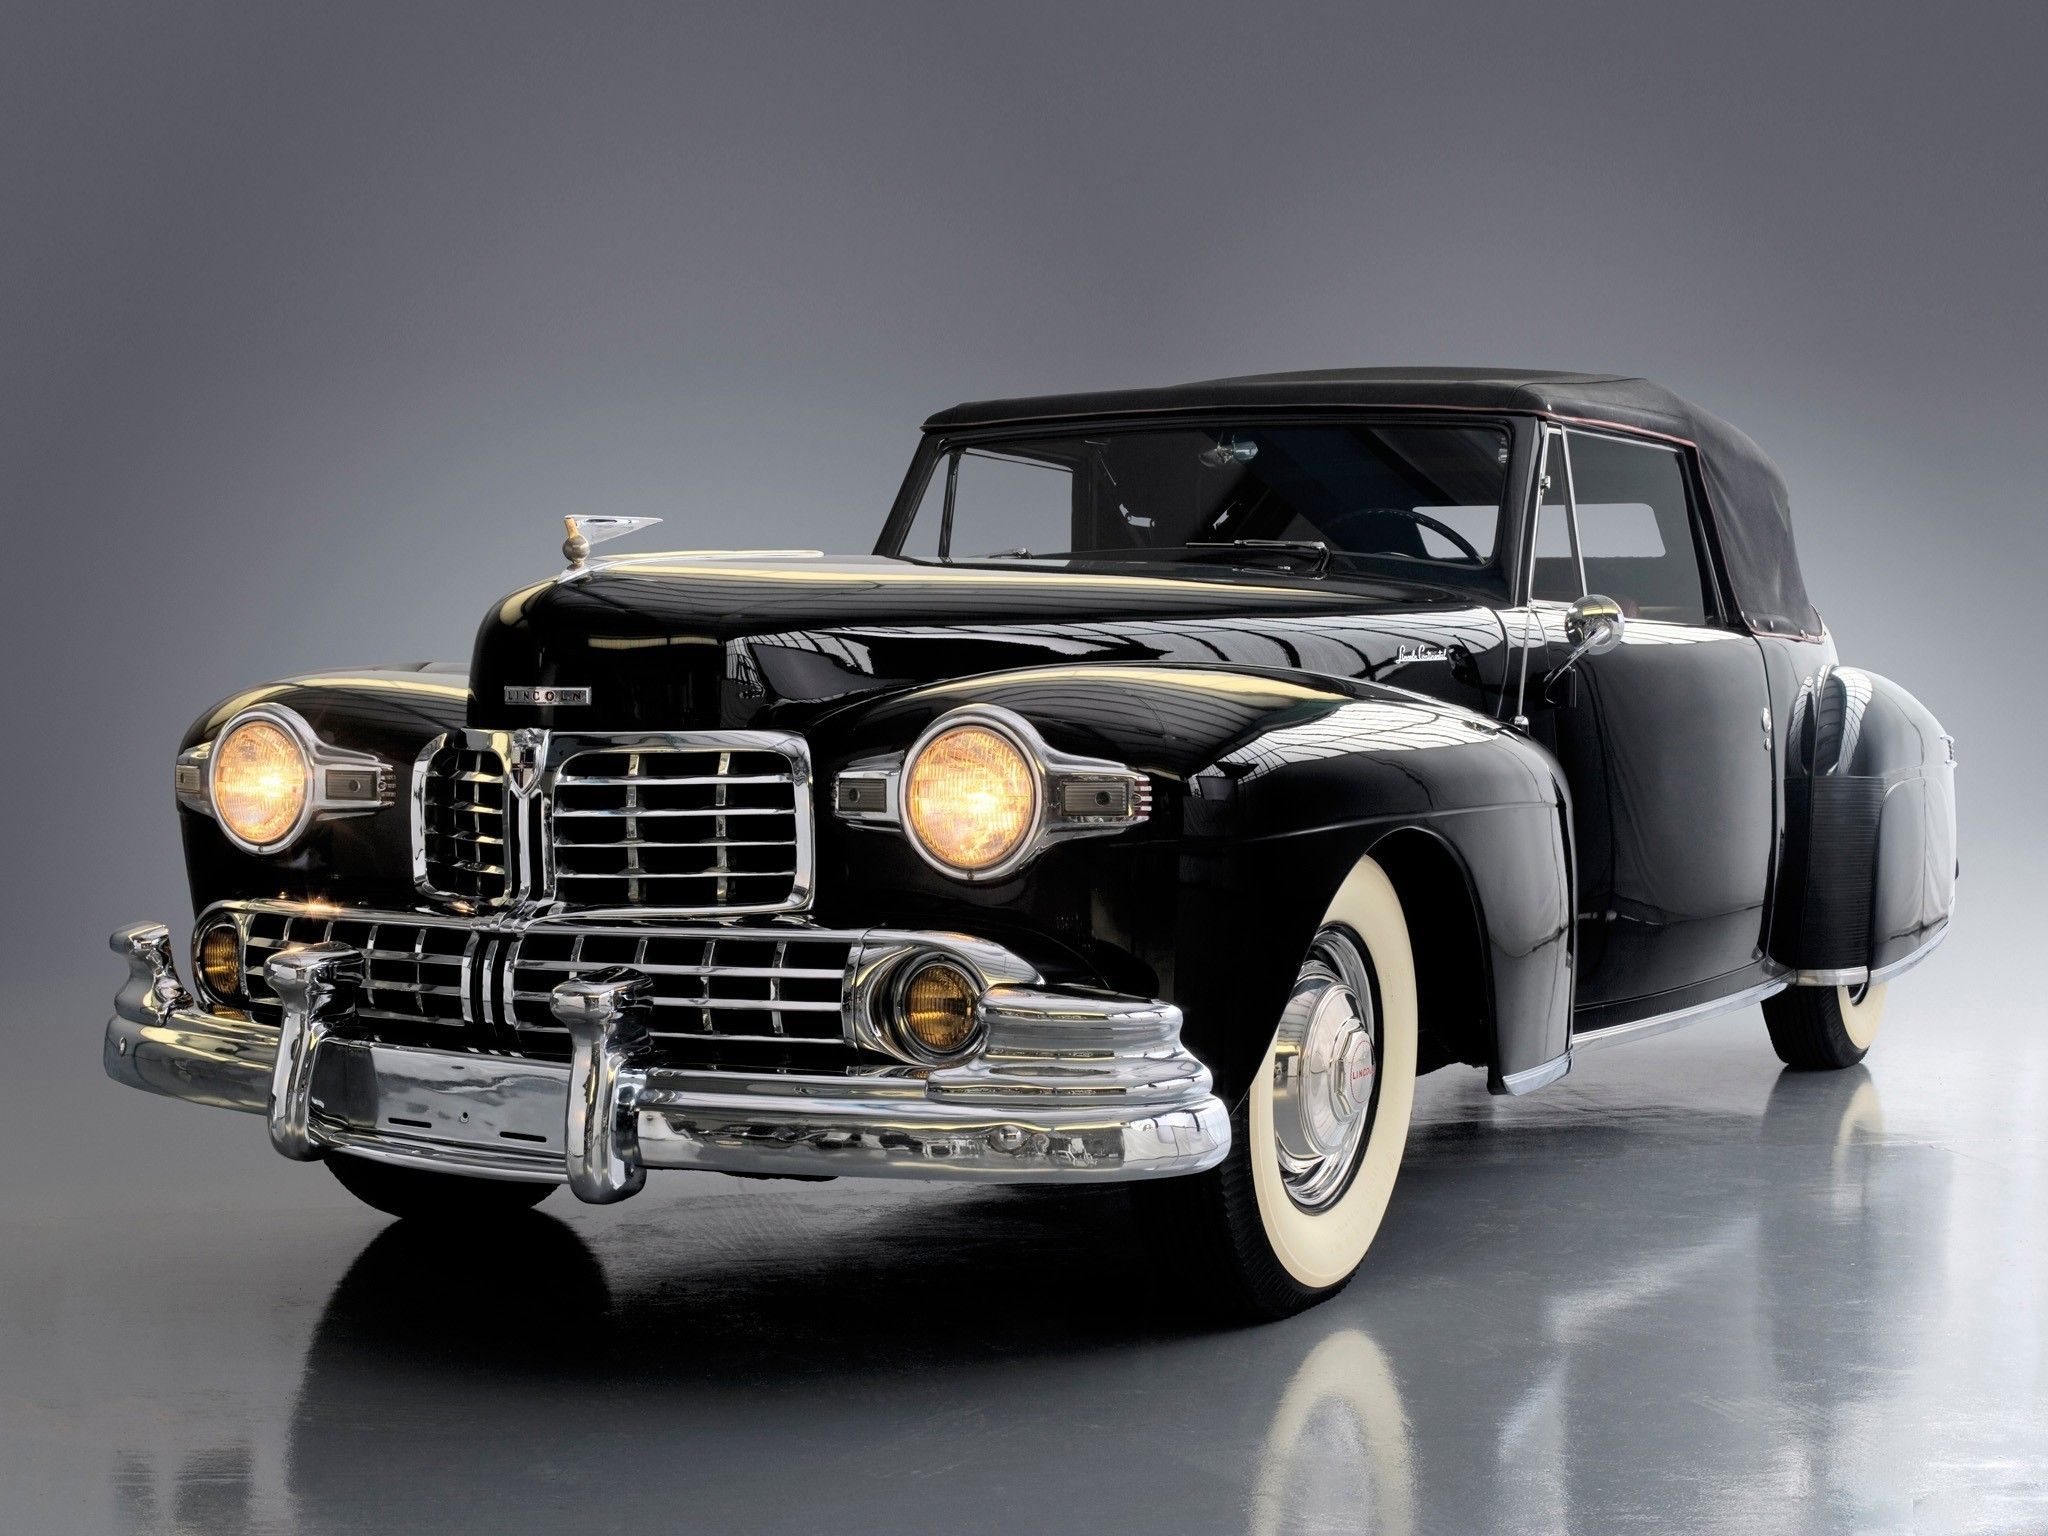 Retro Lincoln. Antique cars, Old classic cars, Lincoln cars